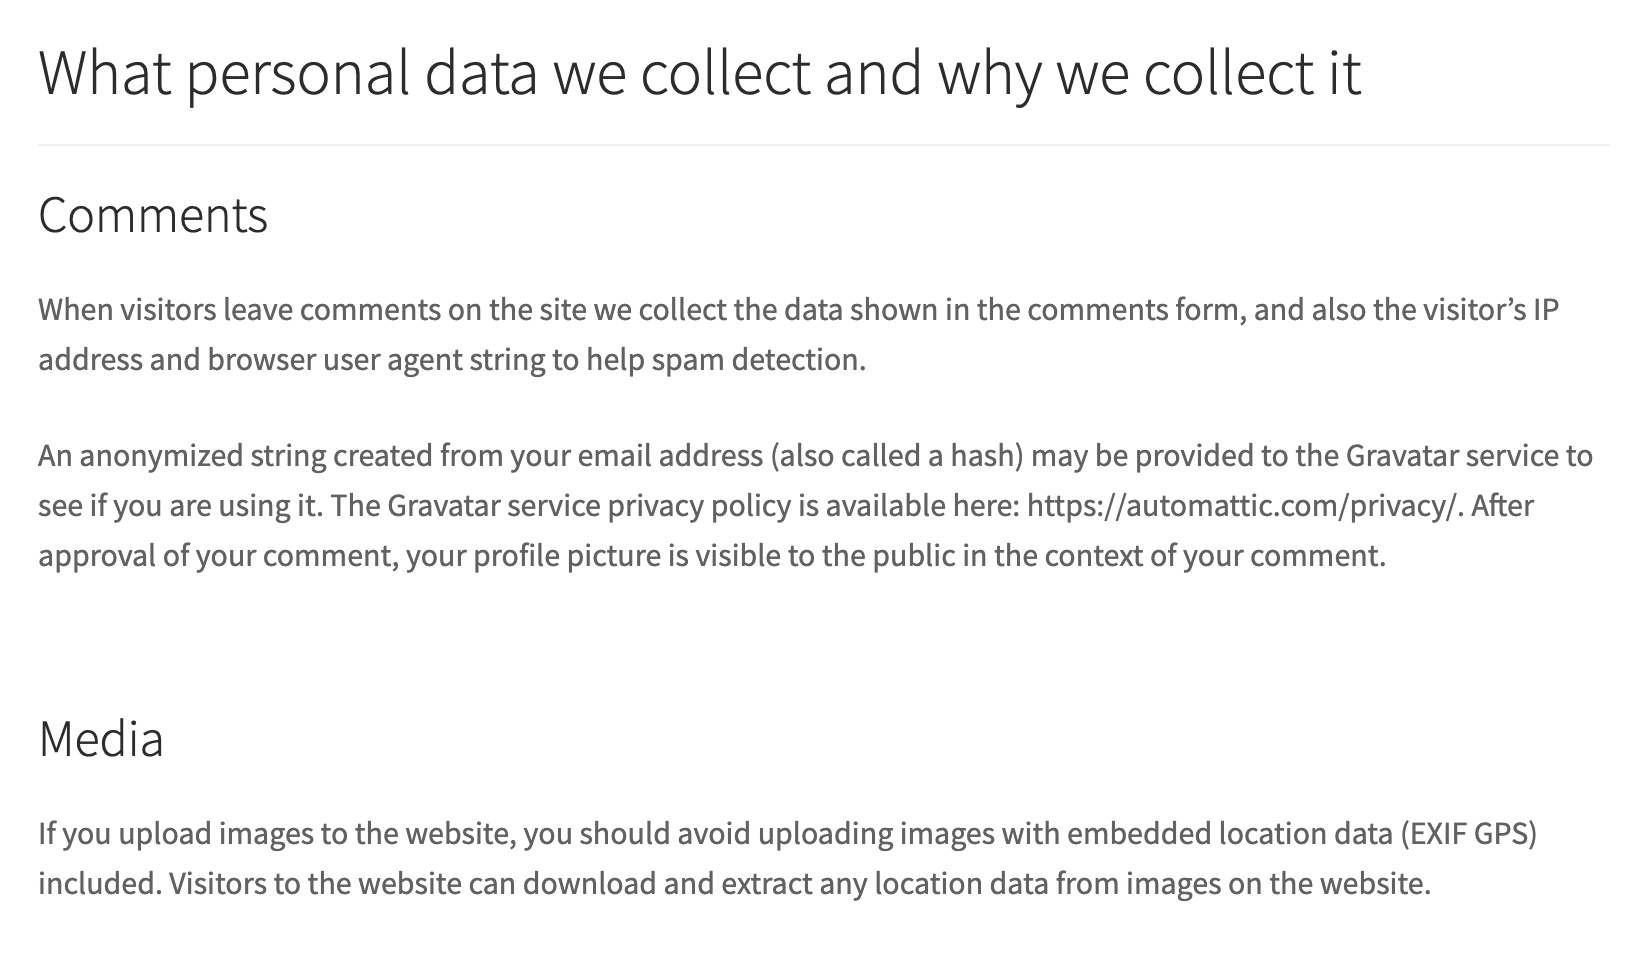 What personal data we collect and why we collect it on WooCommerce.